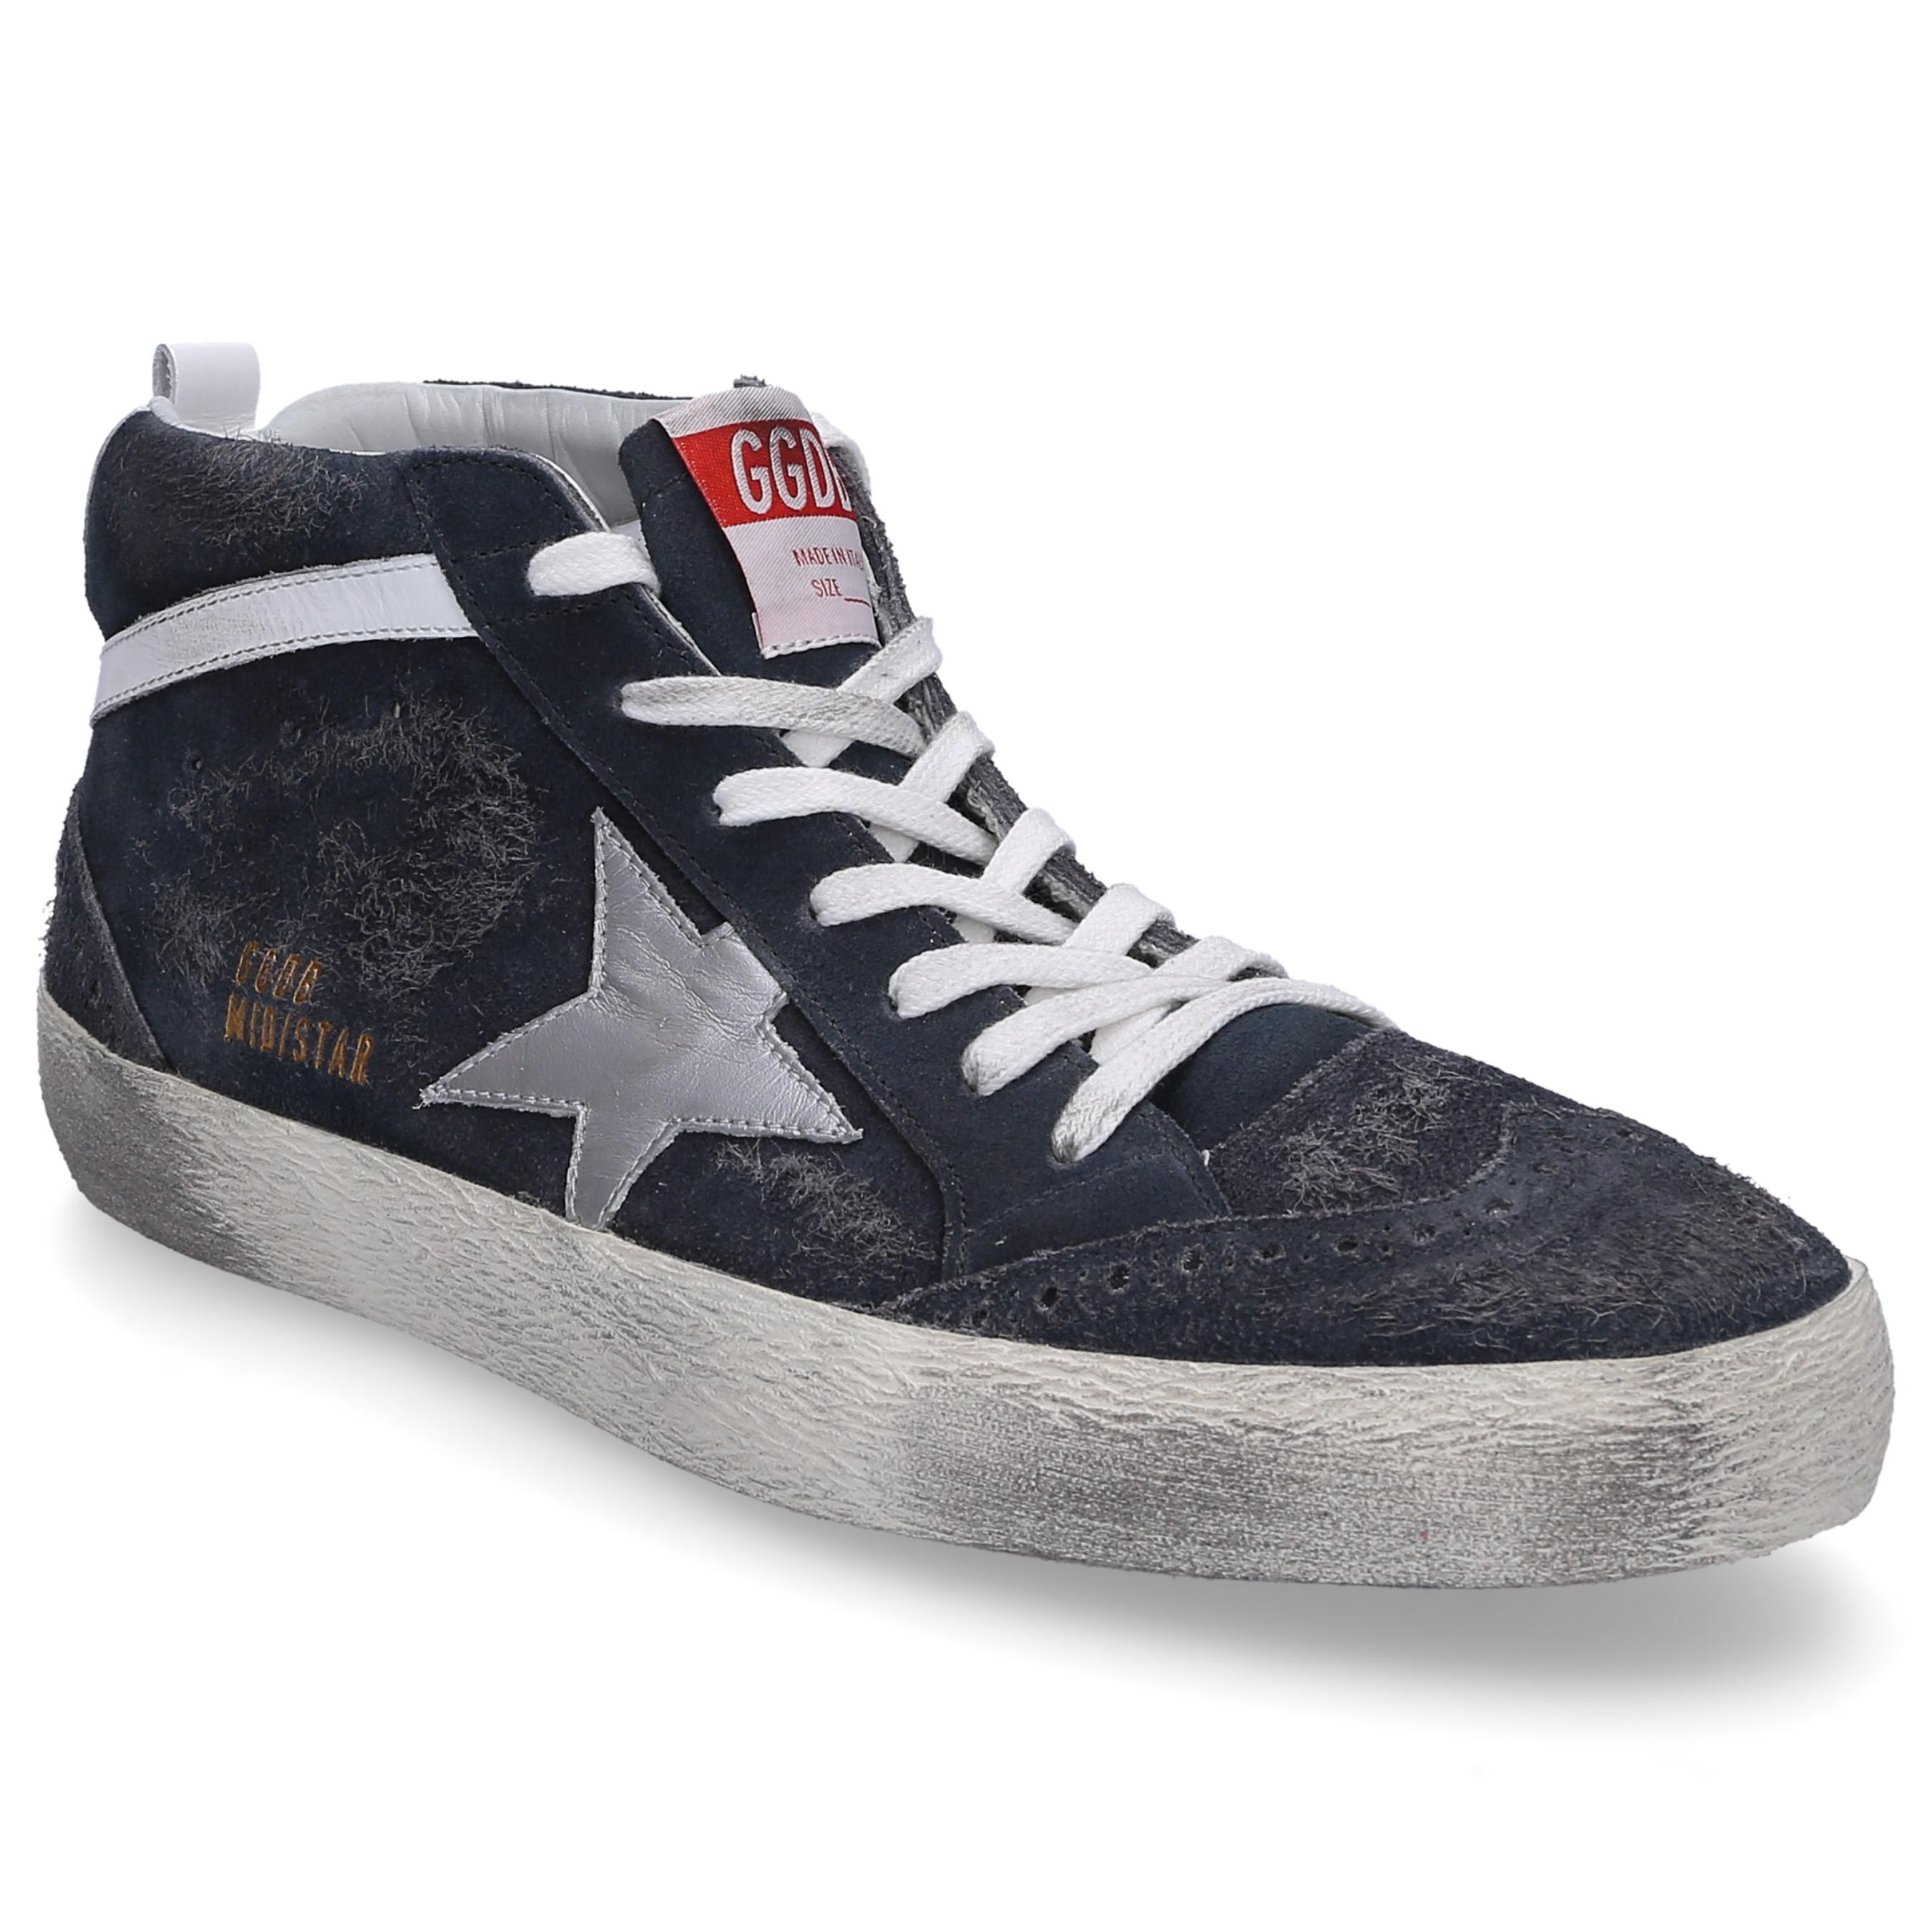 Lyst - Golden Goose Deluxe Brand High-top Sneakers Mid Star Suede Hole ...